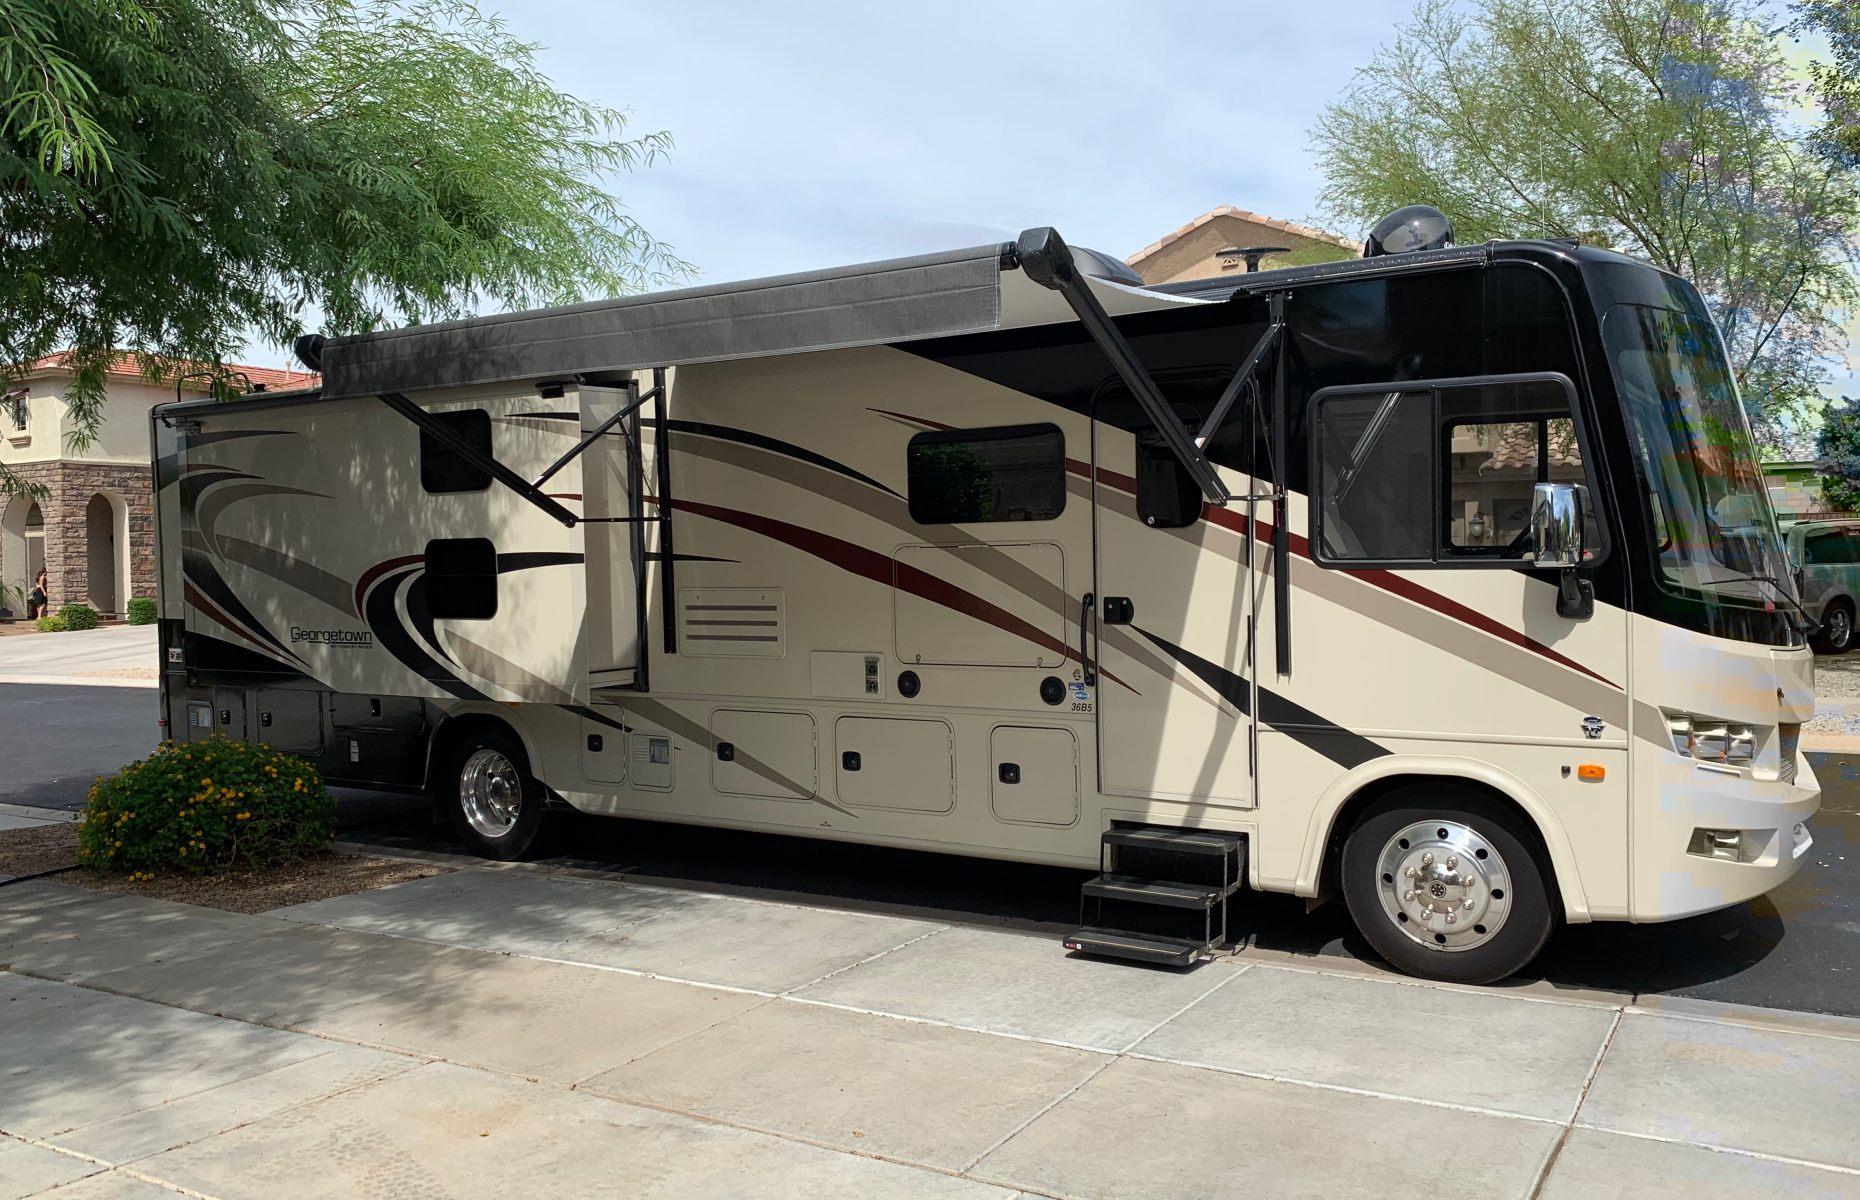 <p>A masterpiece of design, this majestic Class A motorhome utilizes every inch of space. Measuring 37 feet (11m) in length, the 2019 Georgetown GT5 36B5 is decked out with all the 5-star amenities for a peaceful escape and can accommodate up to six passengers.</p>  <p><strong><a href="https://www.loveexploring.com/galleries/65669/unusual-things-youll-find-on-a-road-trip-through-the-usa?page=1">Discover the unusual things you’ll find on a road trip through the USA</a></strong></p>